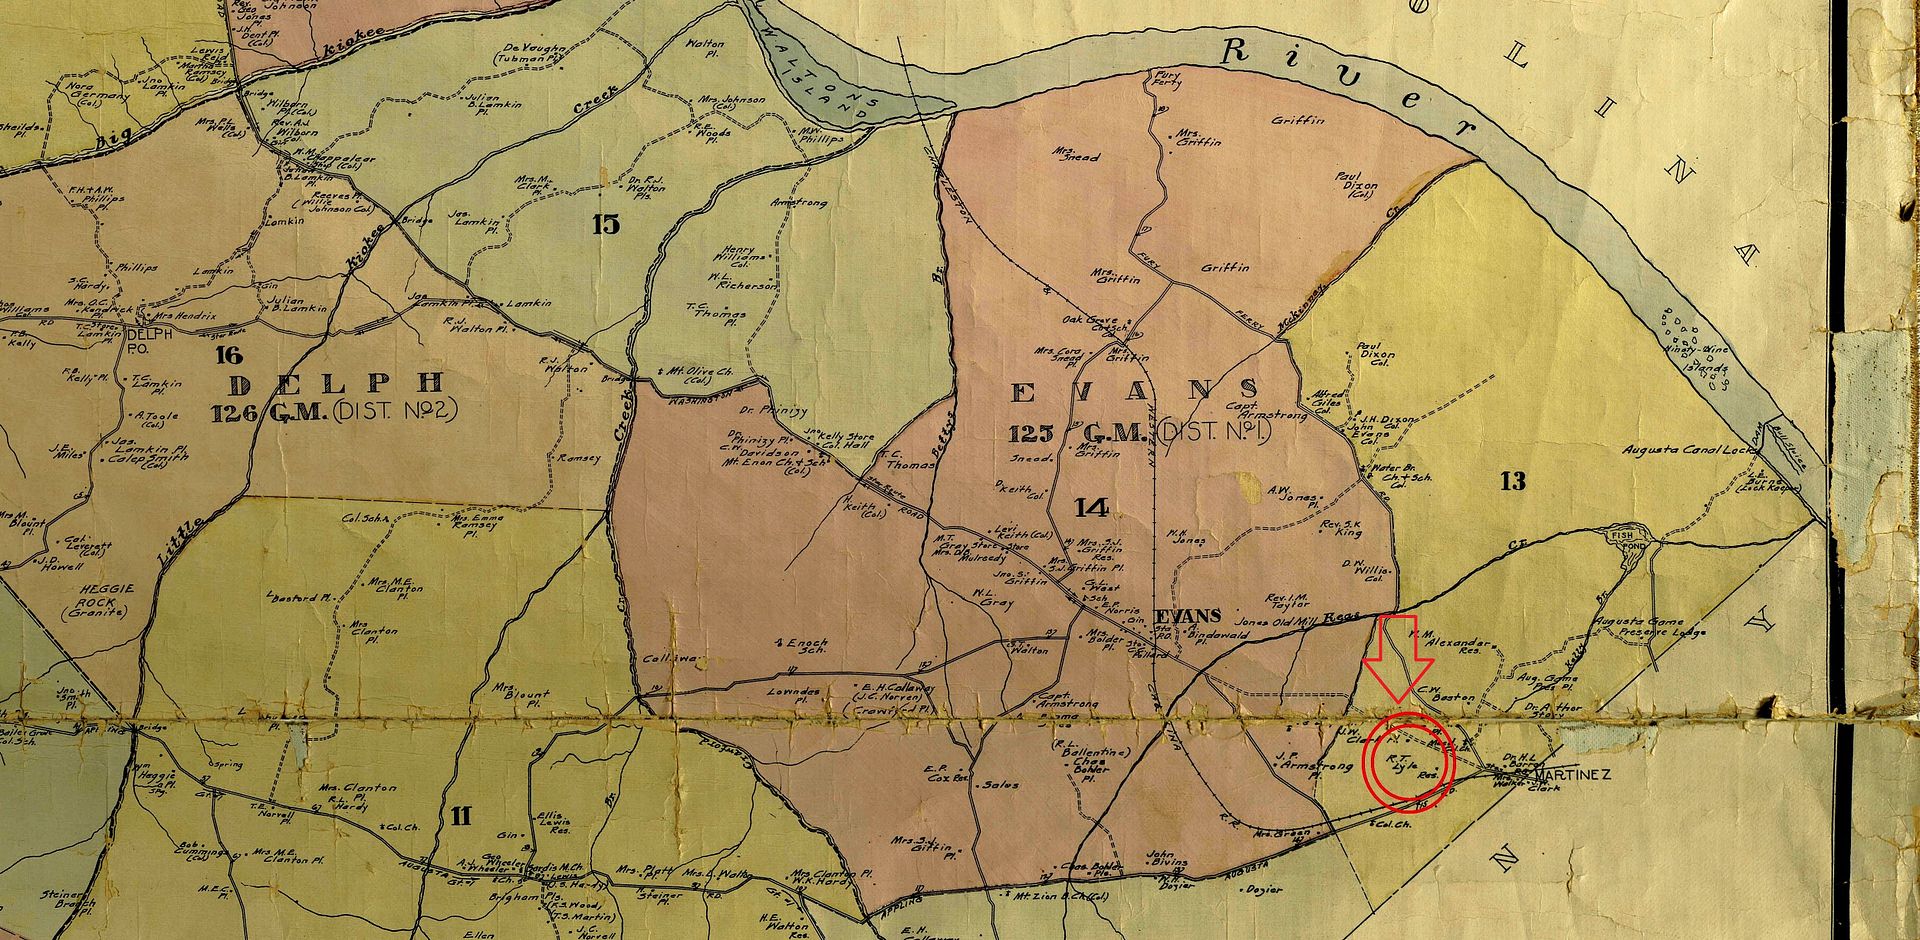 Ive circled the spot where the Lyle farm is located, but where *is* this?